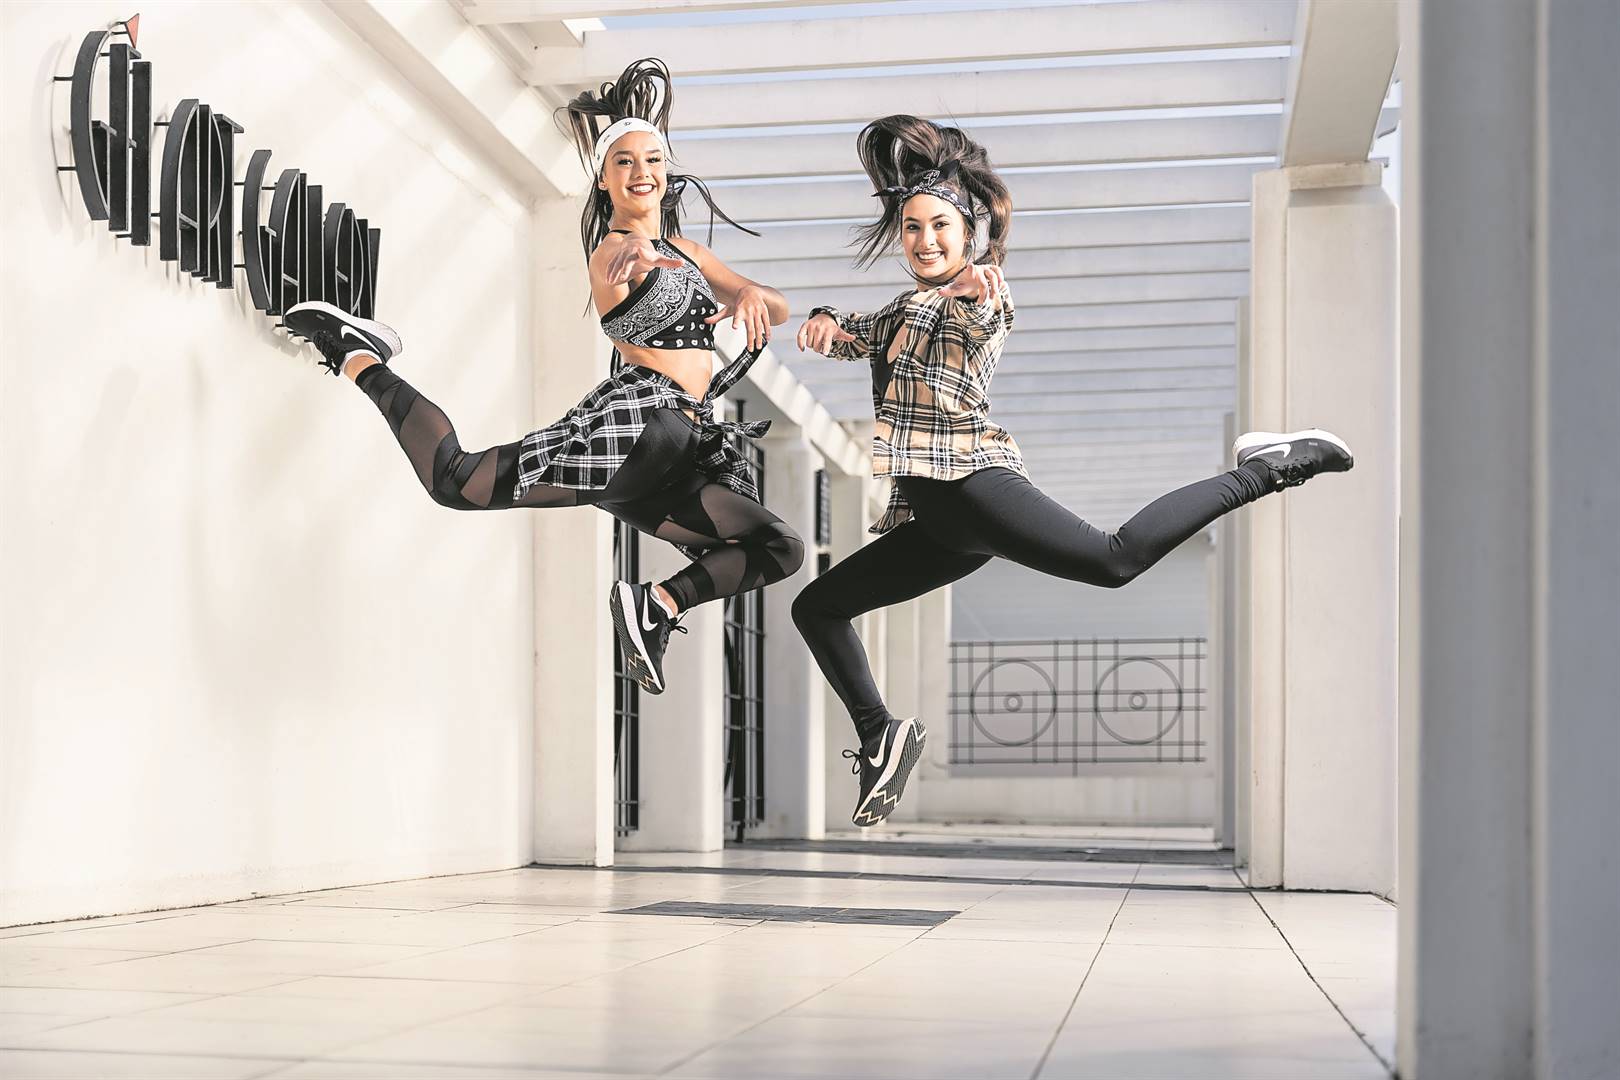 Kelly Schoeman and Kelly Mathiesen, both of Defying Gravity Dance Studio, are looking forward to participating in the 42nd edition of the NMB Dance Festival. The photo was taken at GFI Art Gallery.